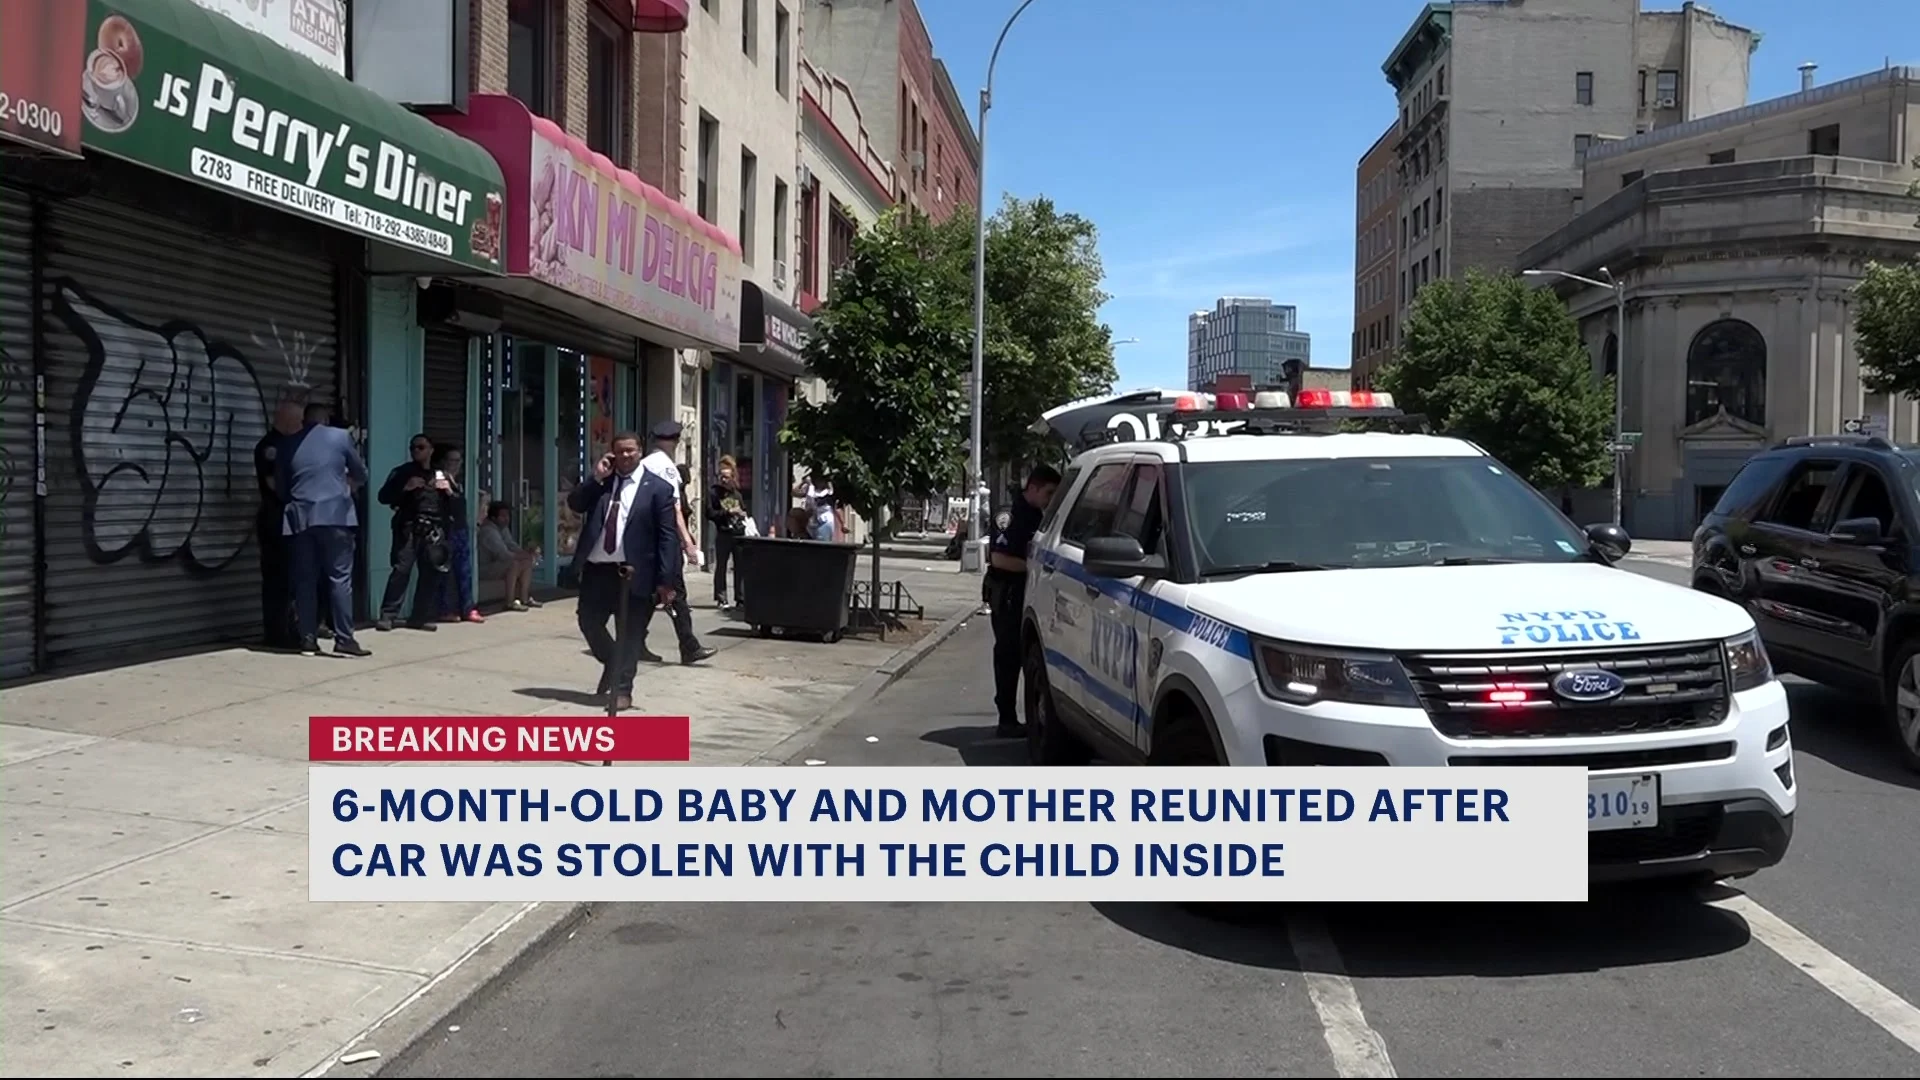 NYPD: Baby found safe following stolen car incident in Mott Haven; 53-year-old in custody